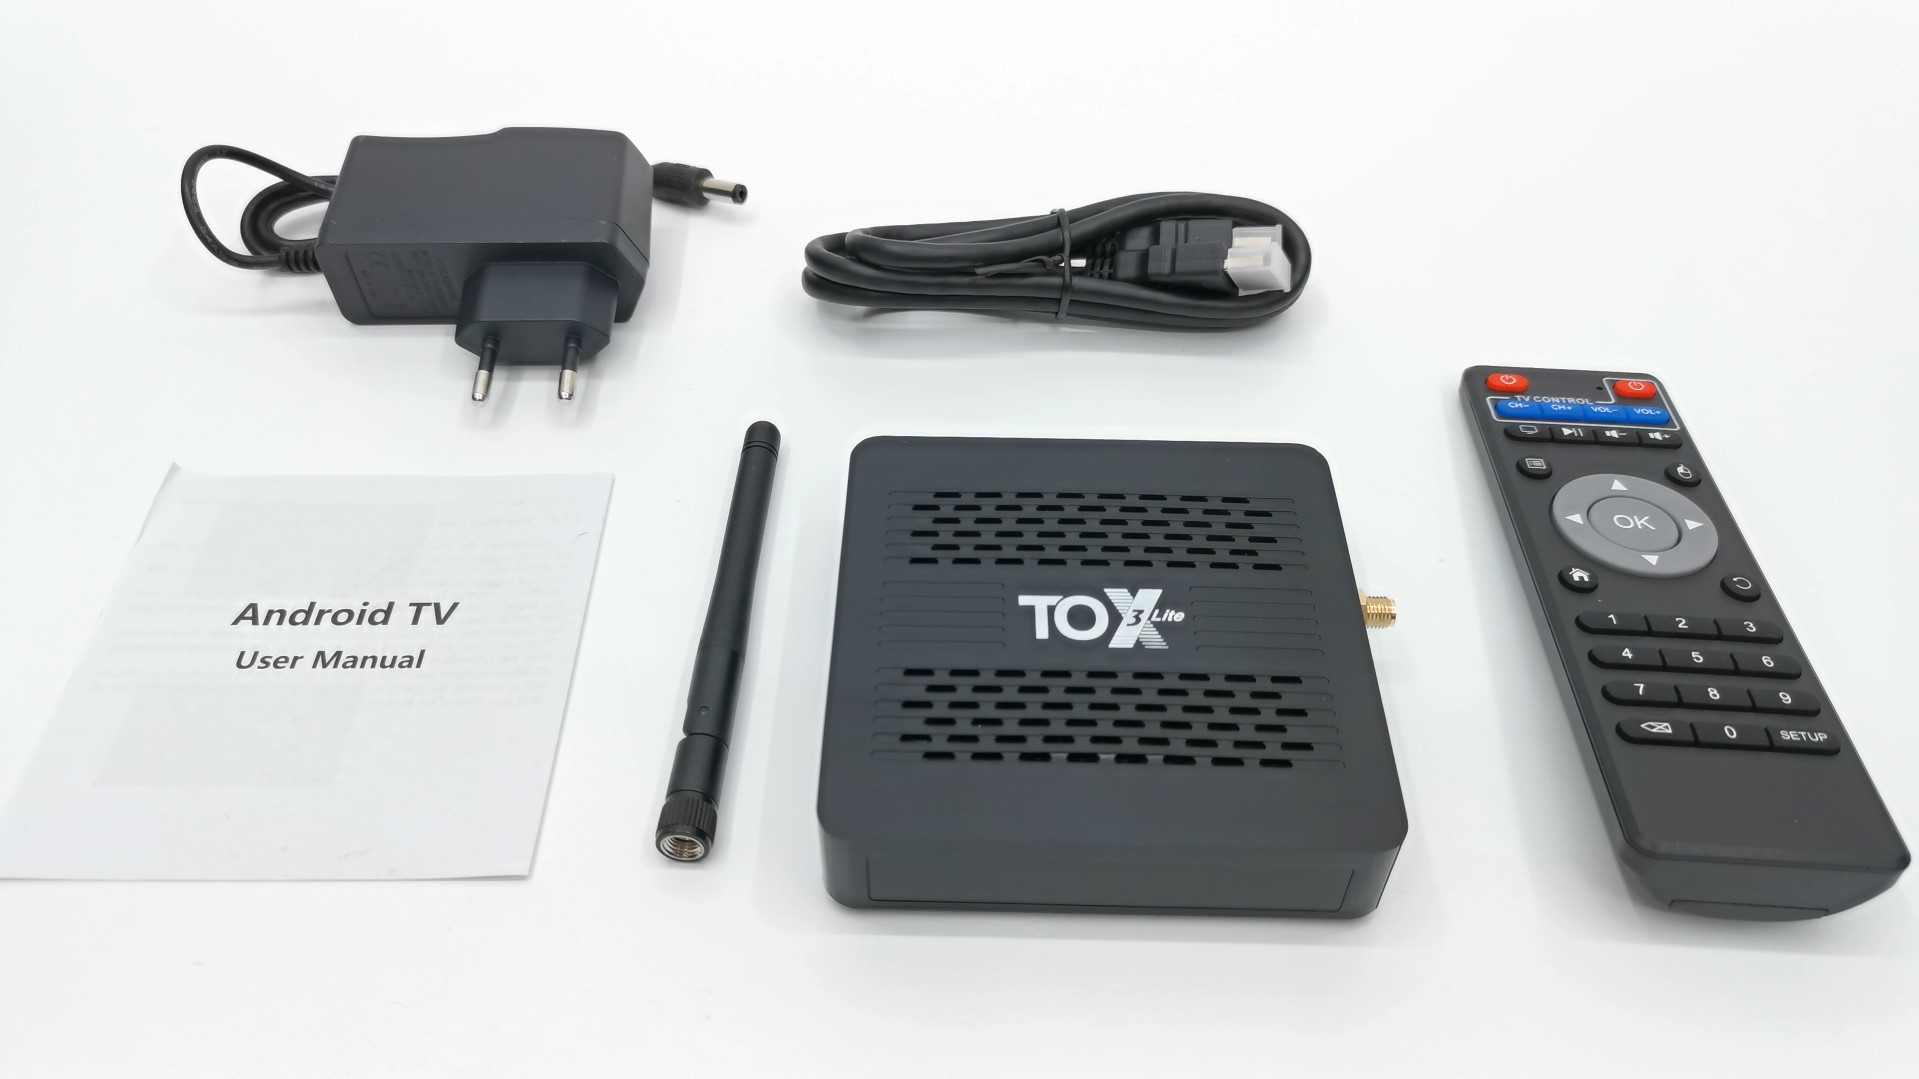 TOX3 TV Box package contents